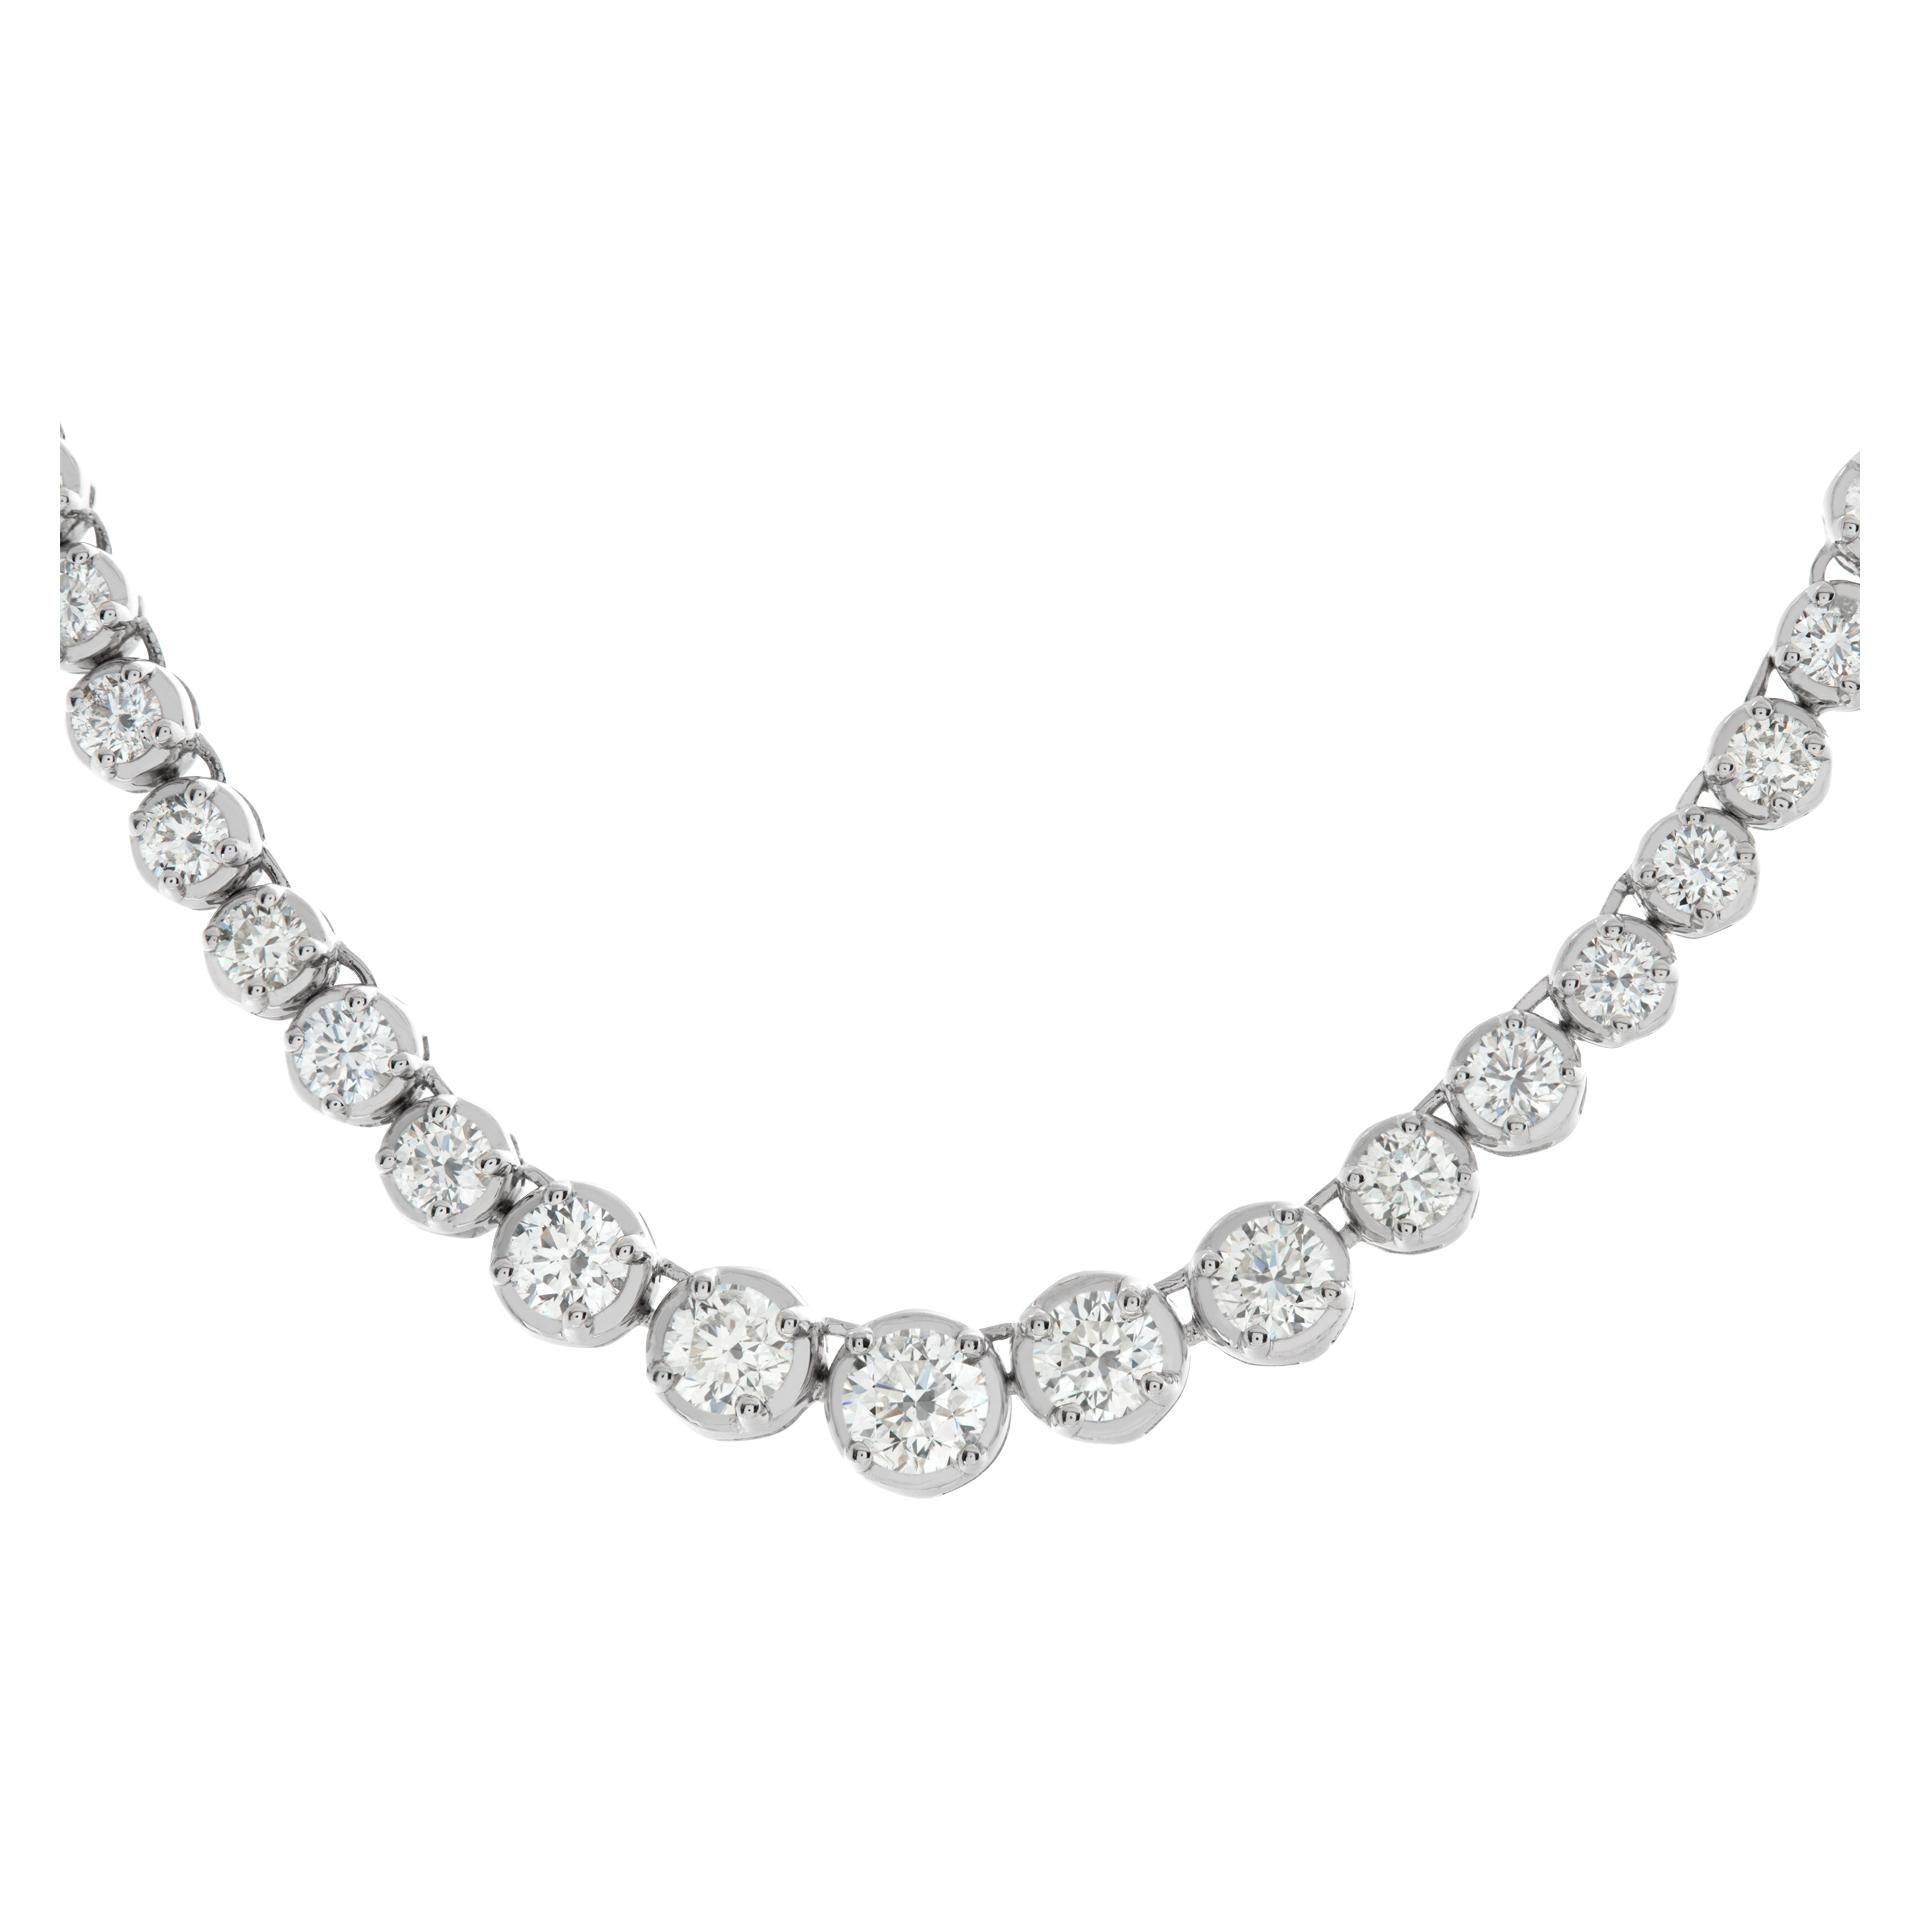 Graduating diamond line necklace in 18k white gold with 6 carats in G-H color, VS-SI clarity round brilliant cut diamonds. Length 16.5 inches.